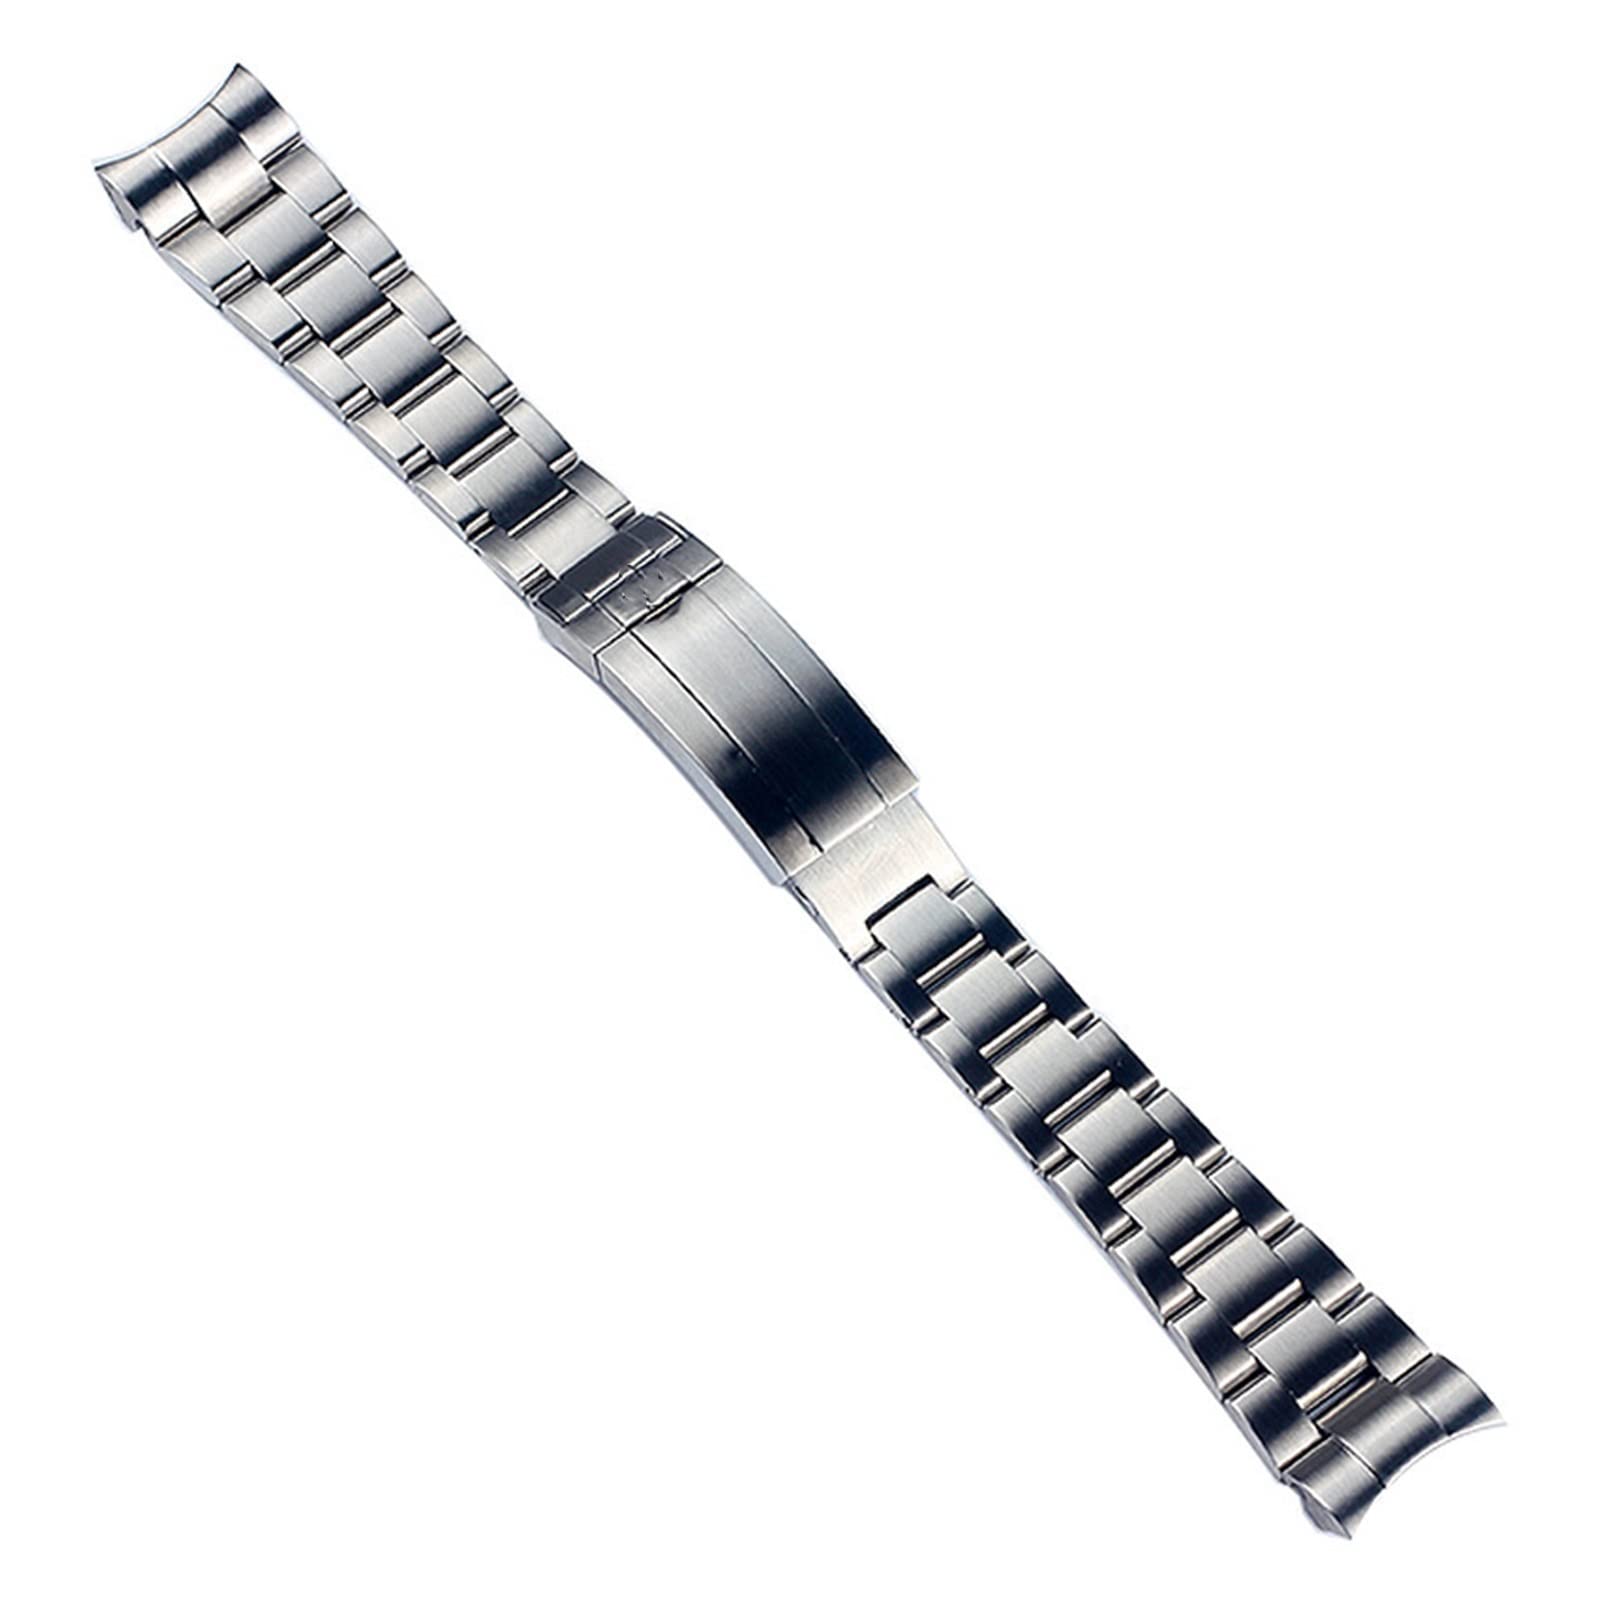 CRFYJ Stainless Steel Watch Band Fit for Rolex Water Ghost 21mm 20mm Metal Strap Watch Accessories Men Watch Band Chain (Band Color : 21mm)